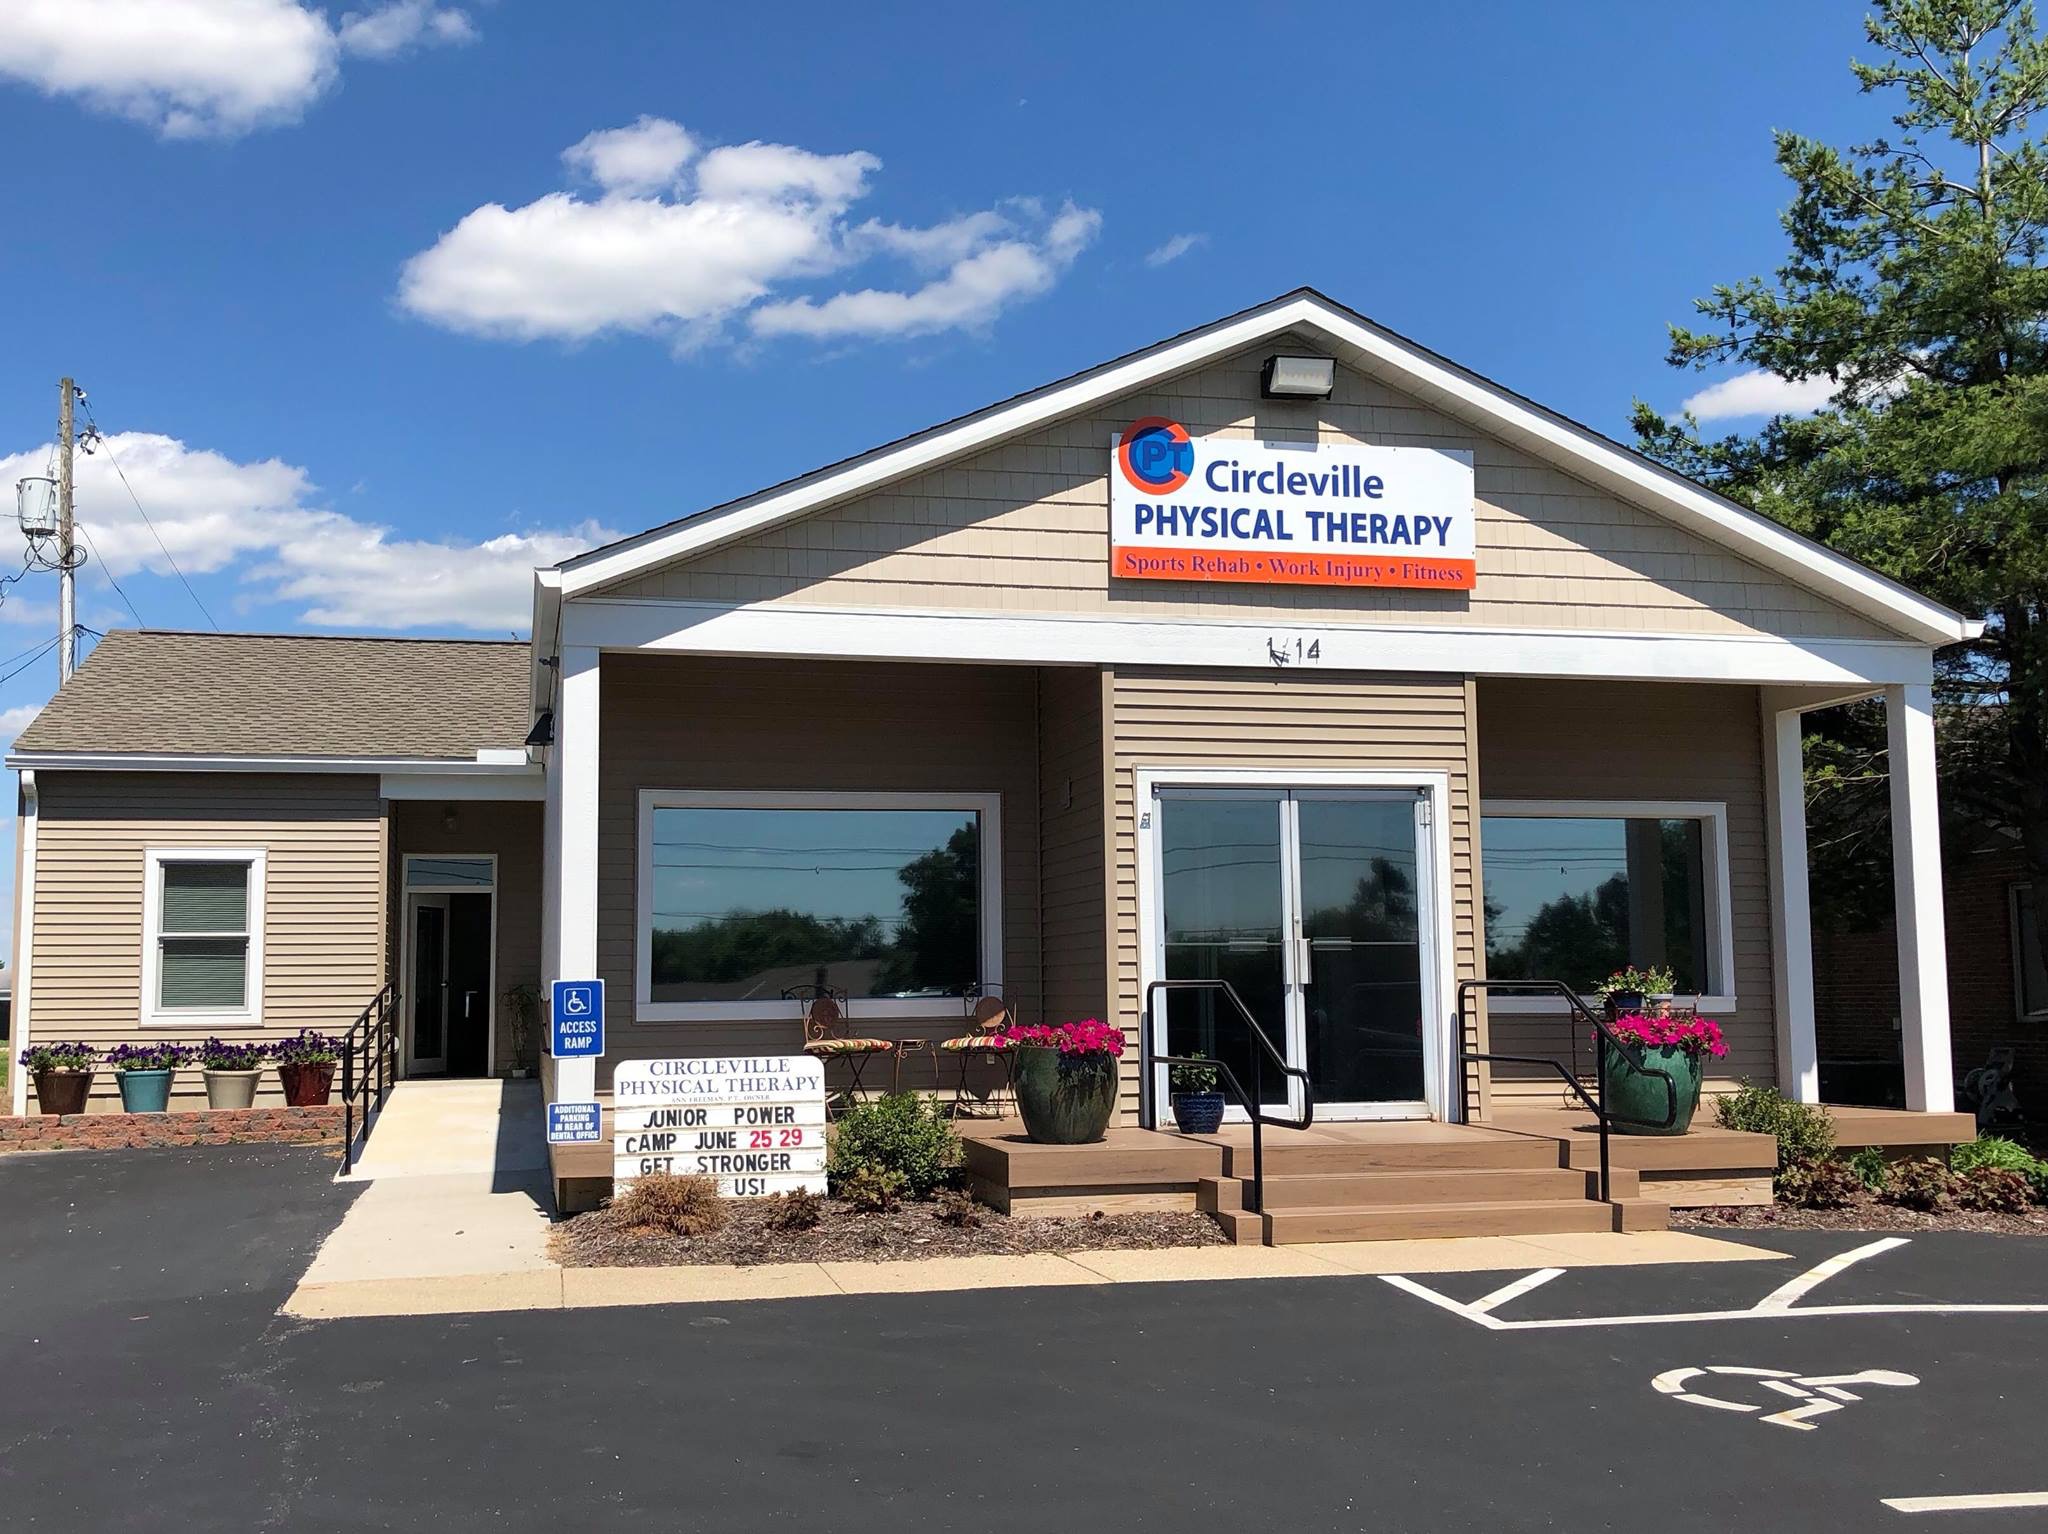 Circleville Physical Therapy